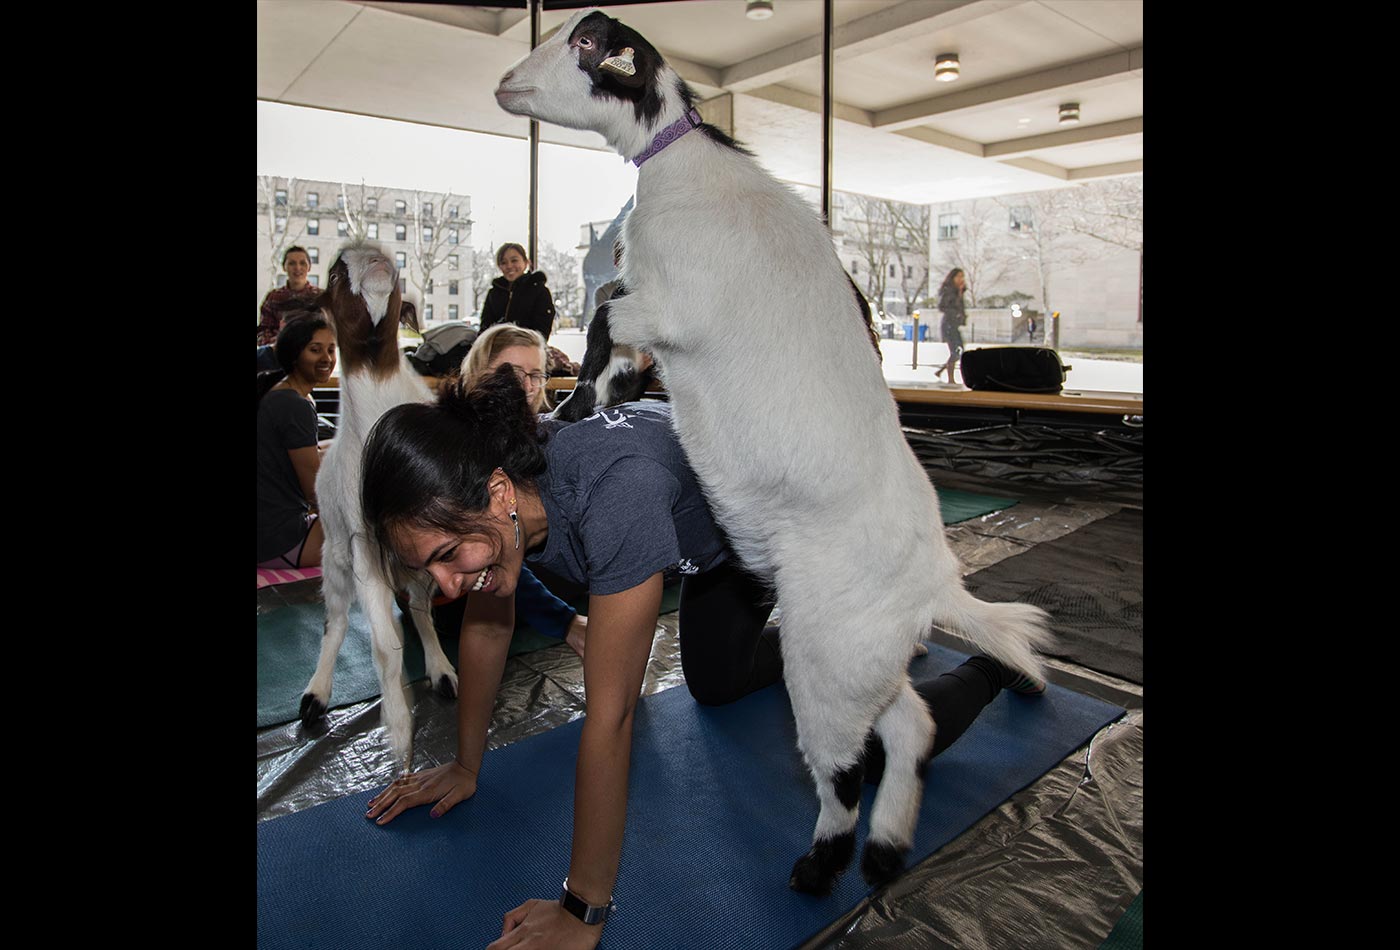 A female graduate student is on her hands and knees as a white goat puts its two front hooves on her back